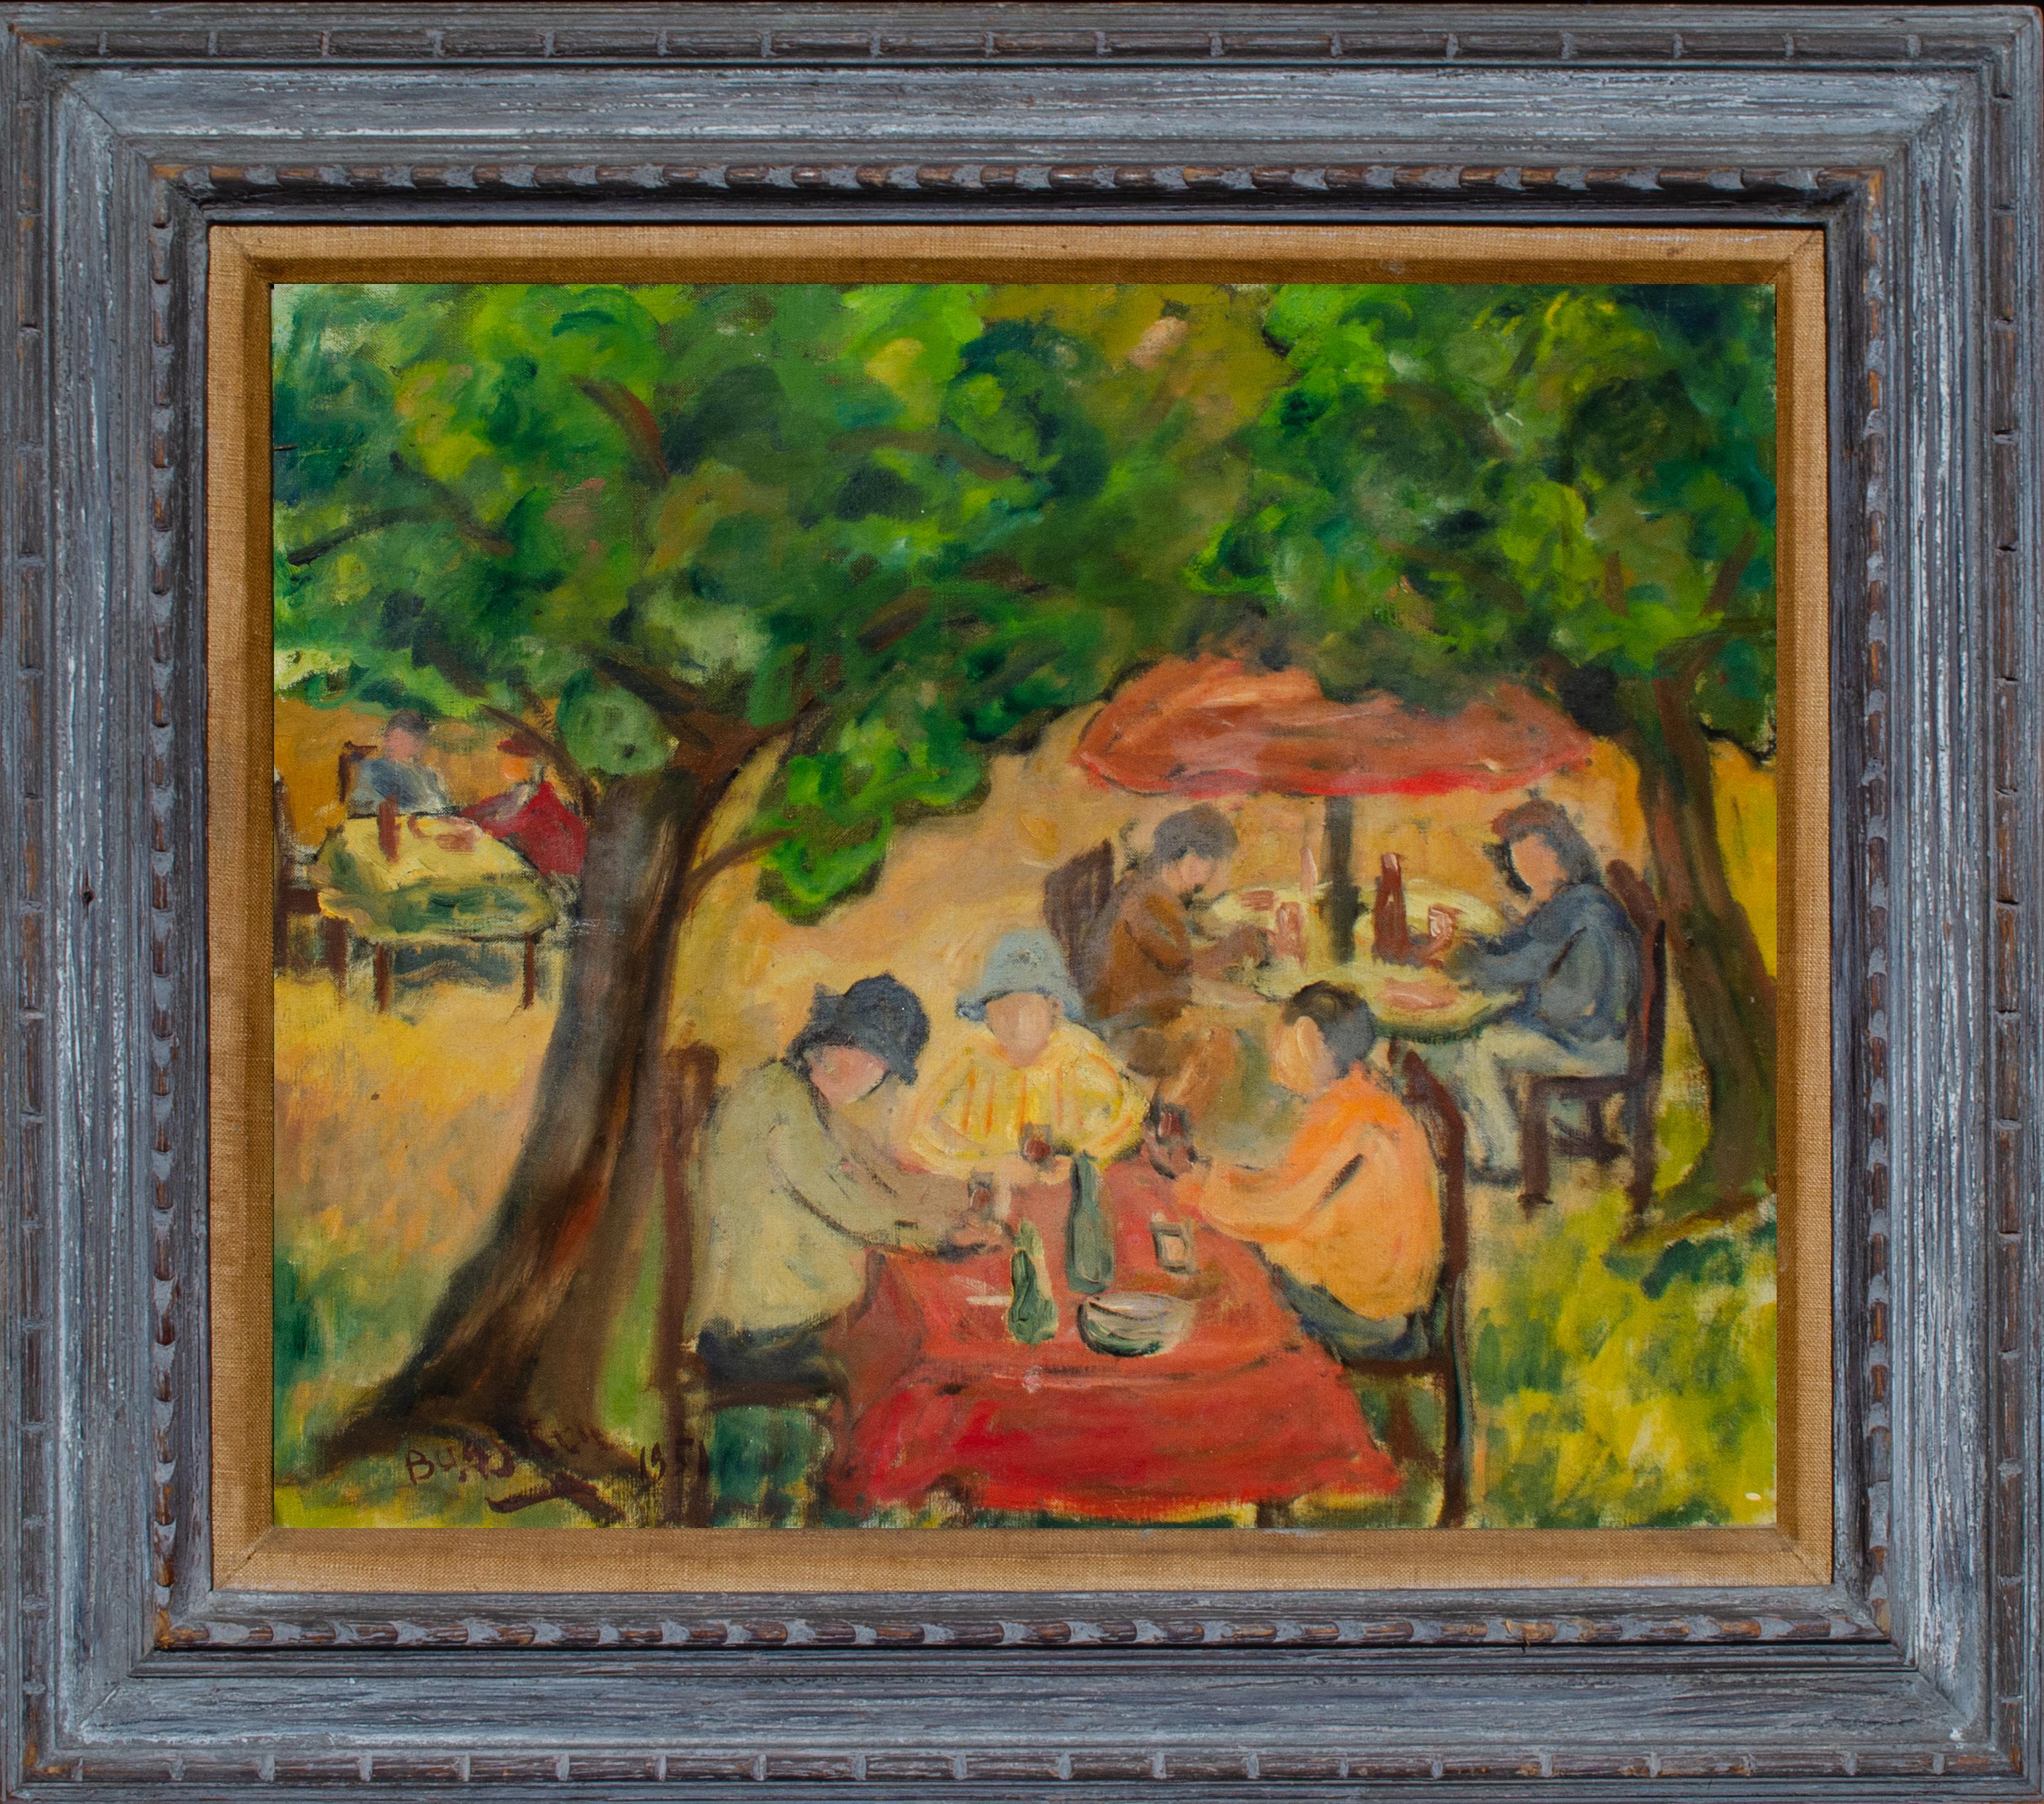 Unknown Figurative Painting - Lovely 1950s Park Painting